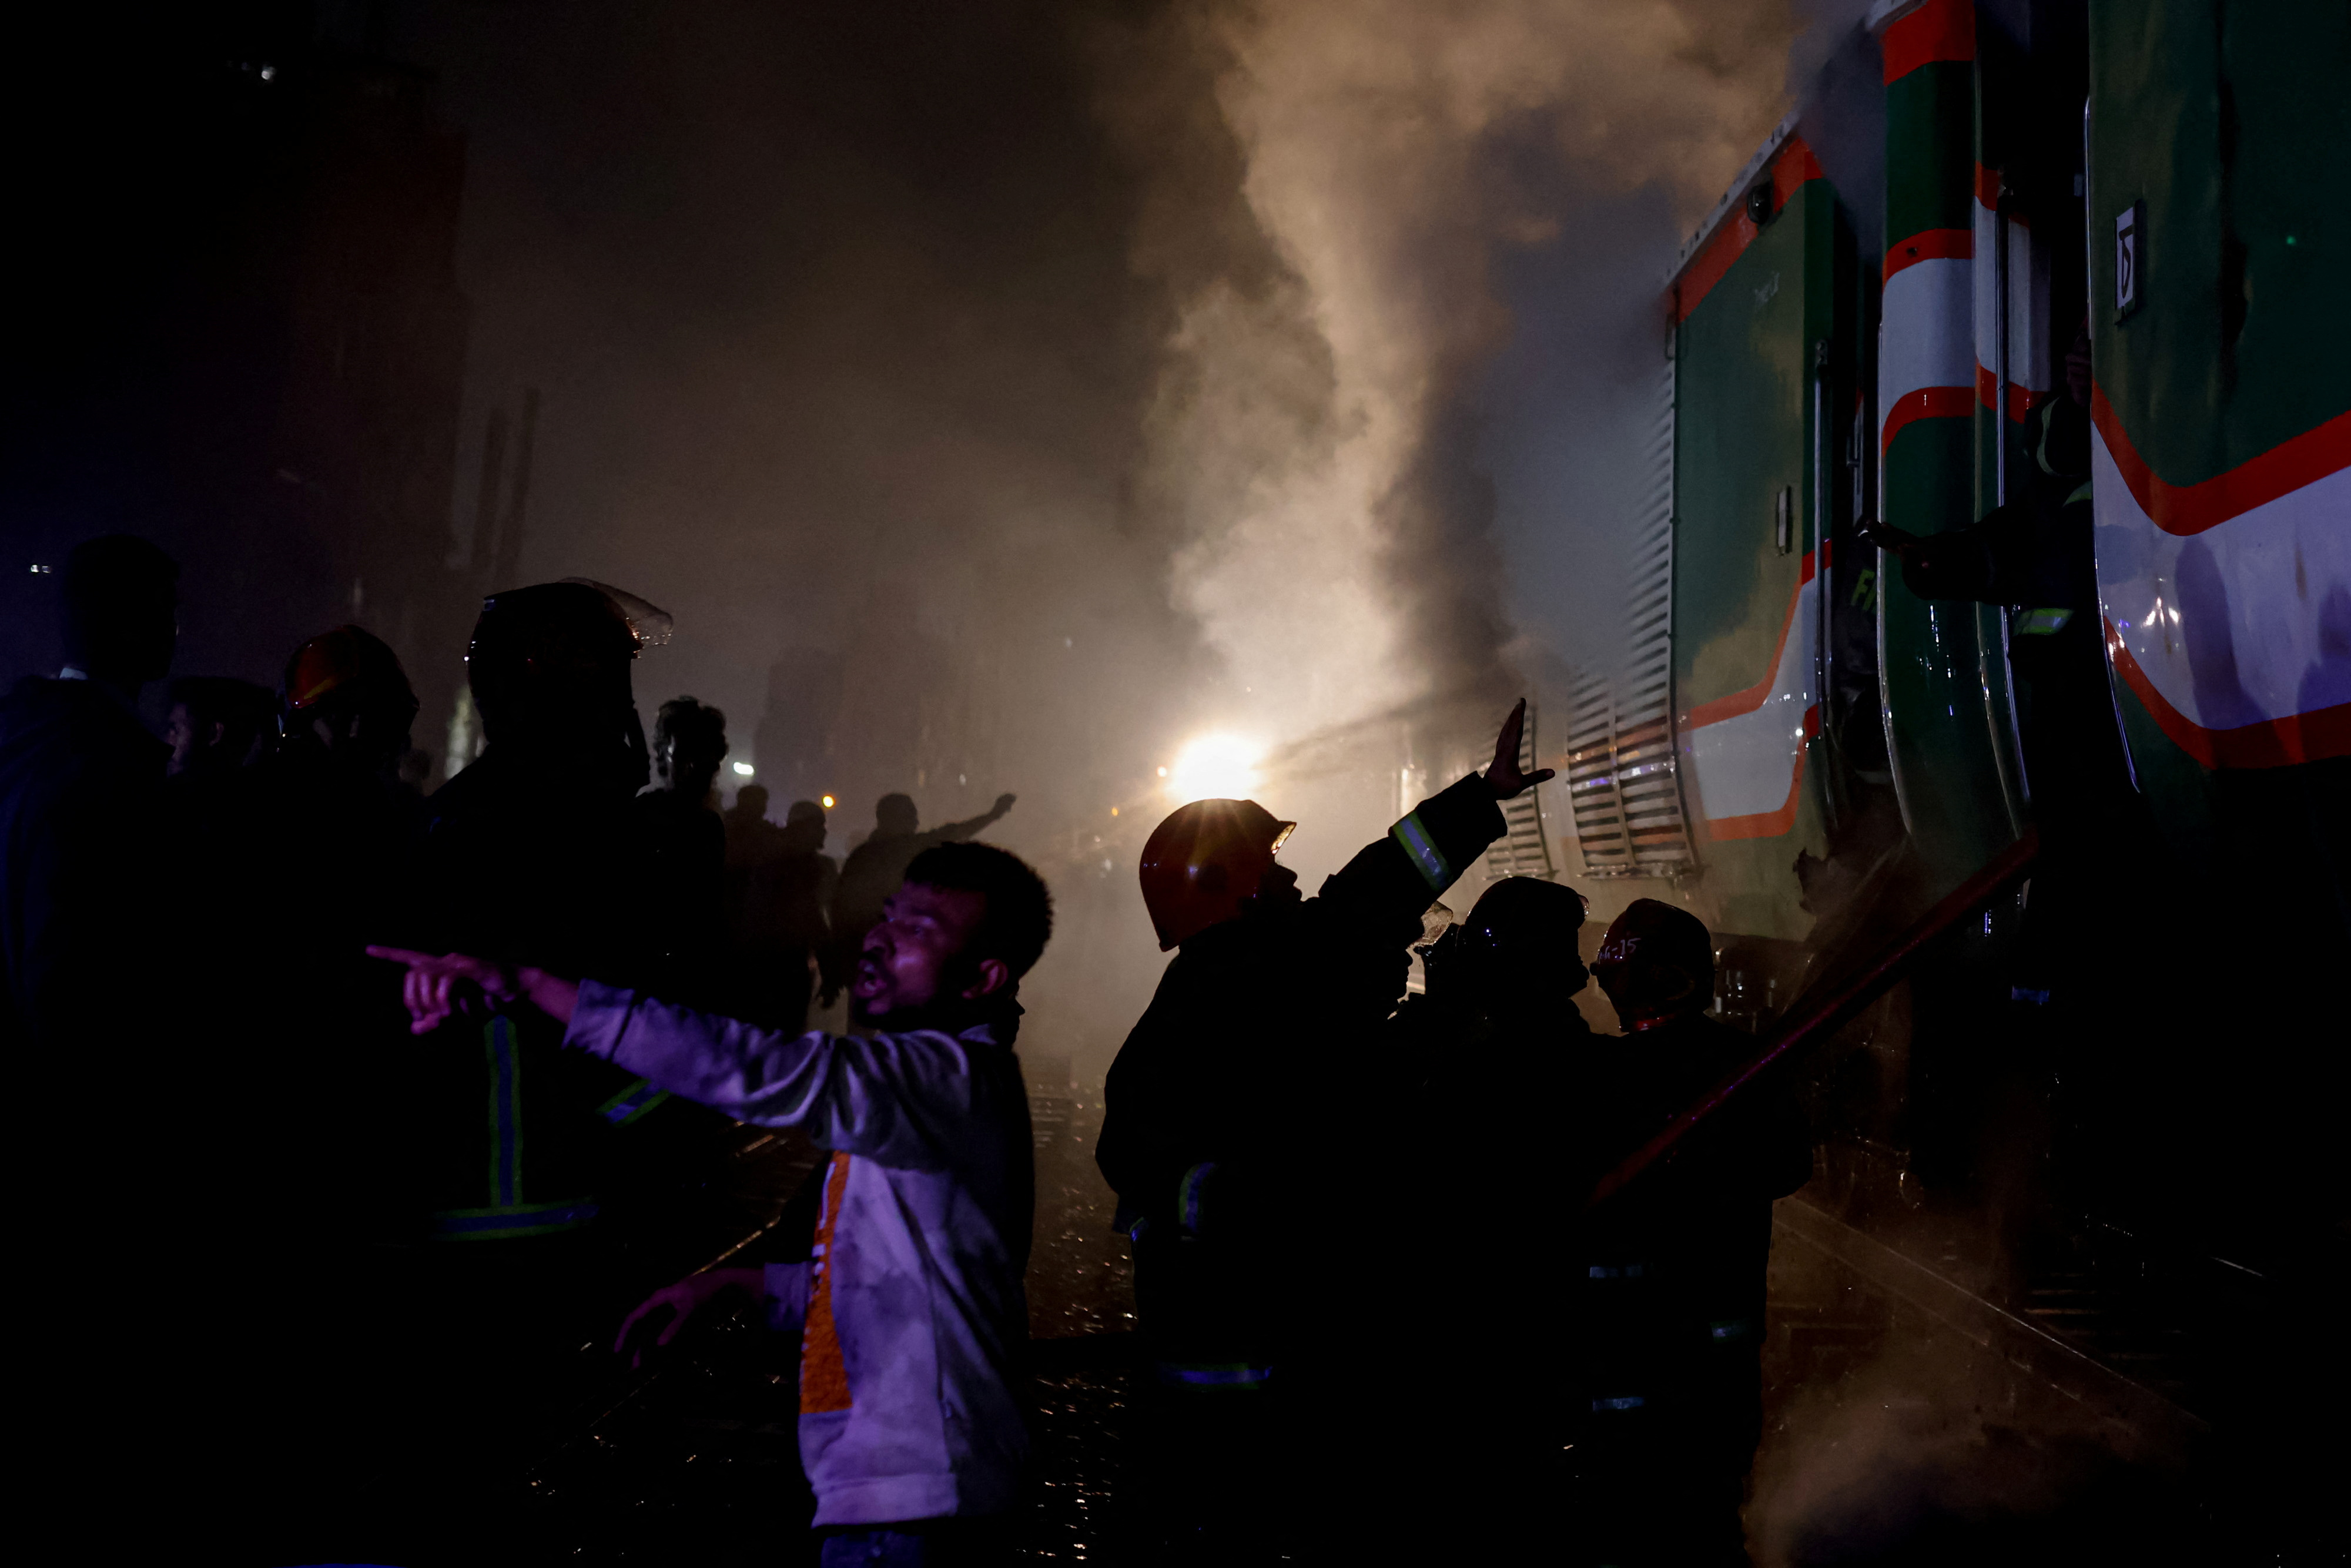 A passenger train caught fire ahead of the general election in Dhaka